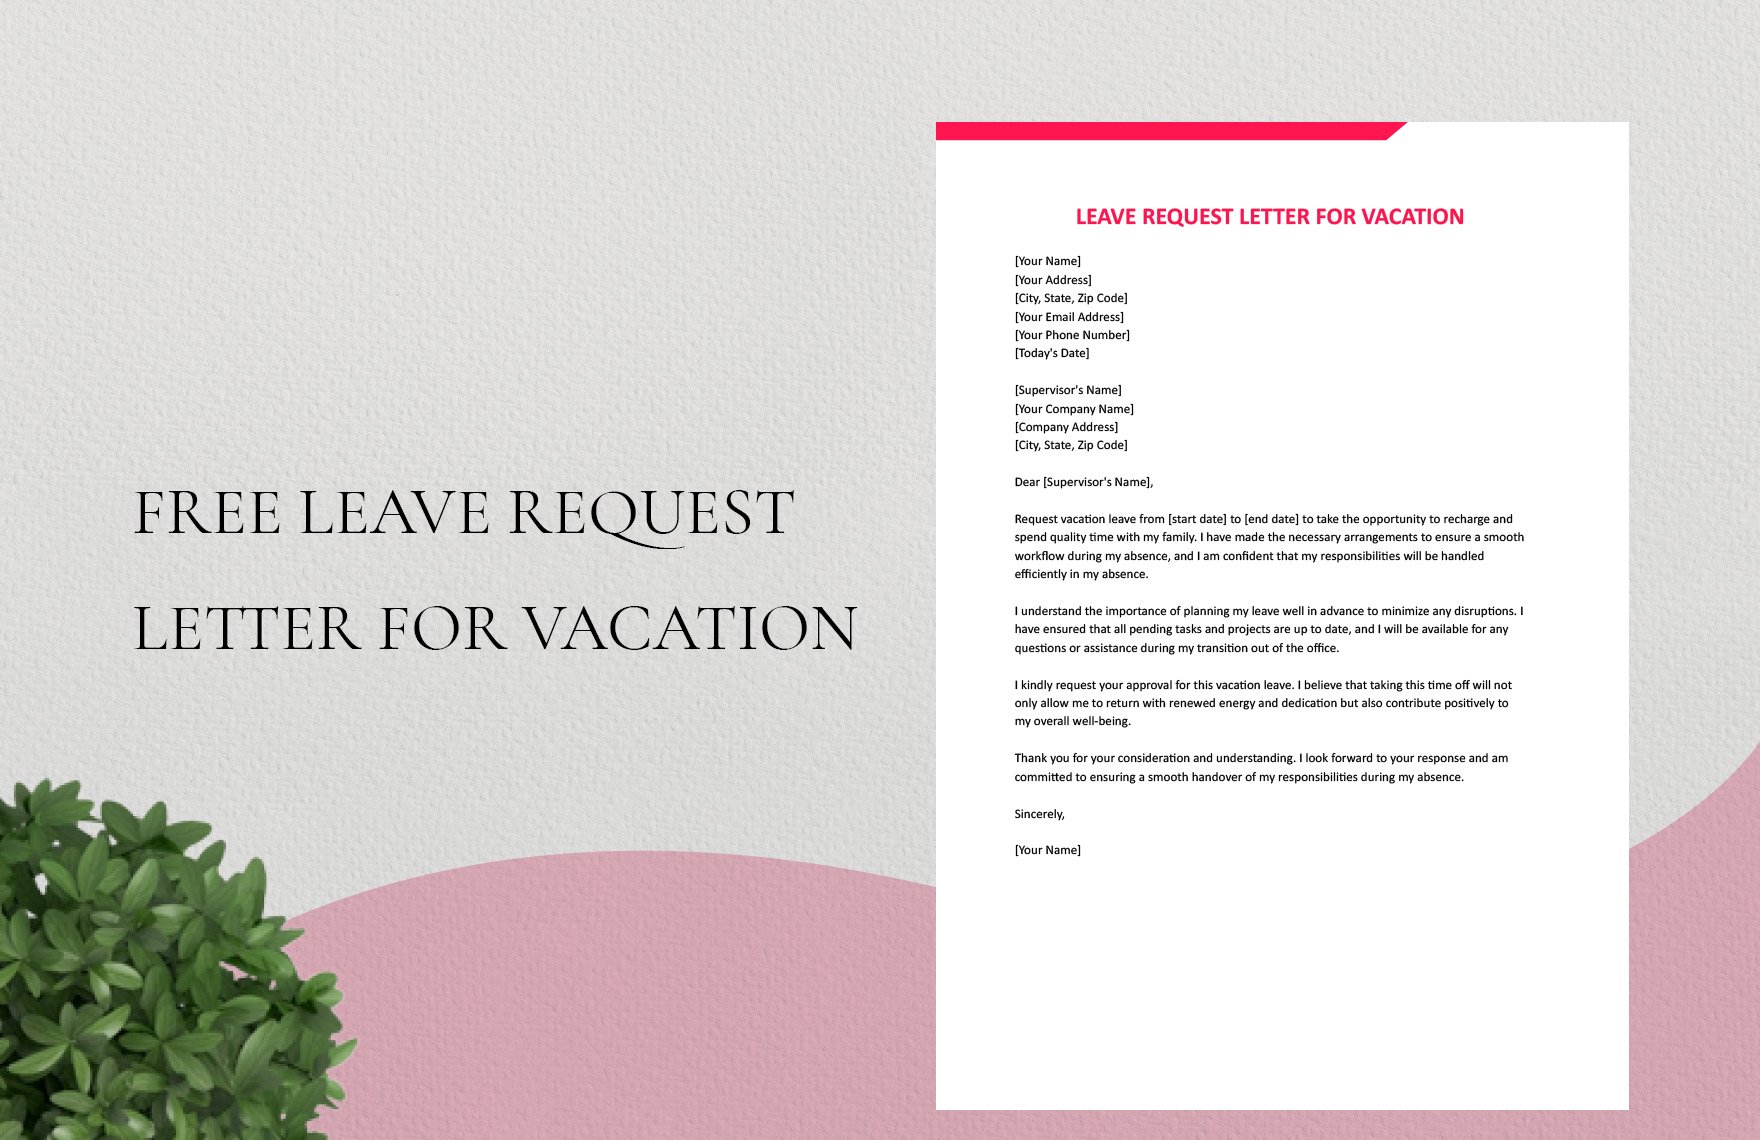 Leave Request Letter For Vacation